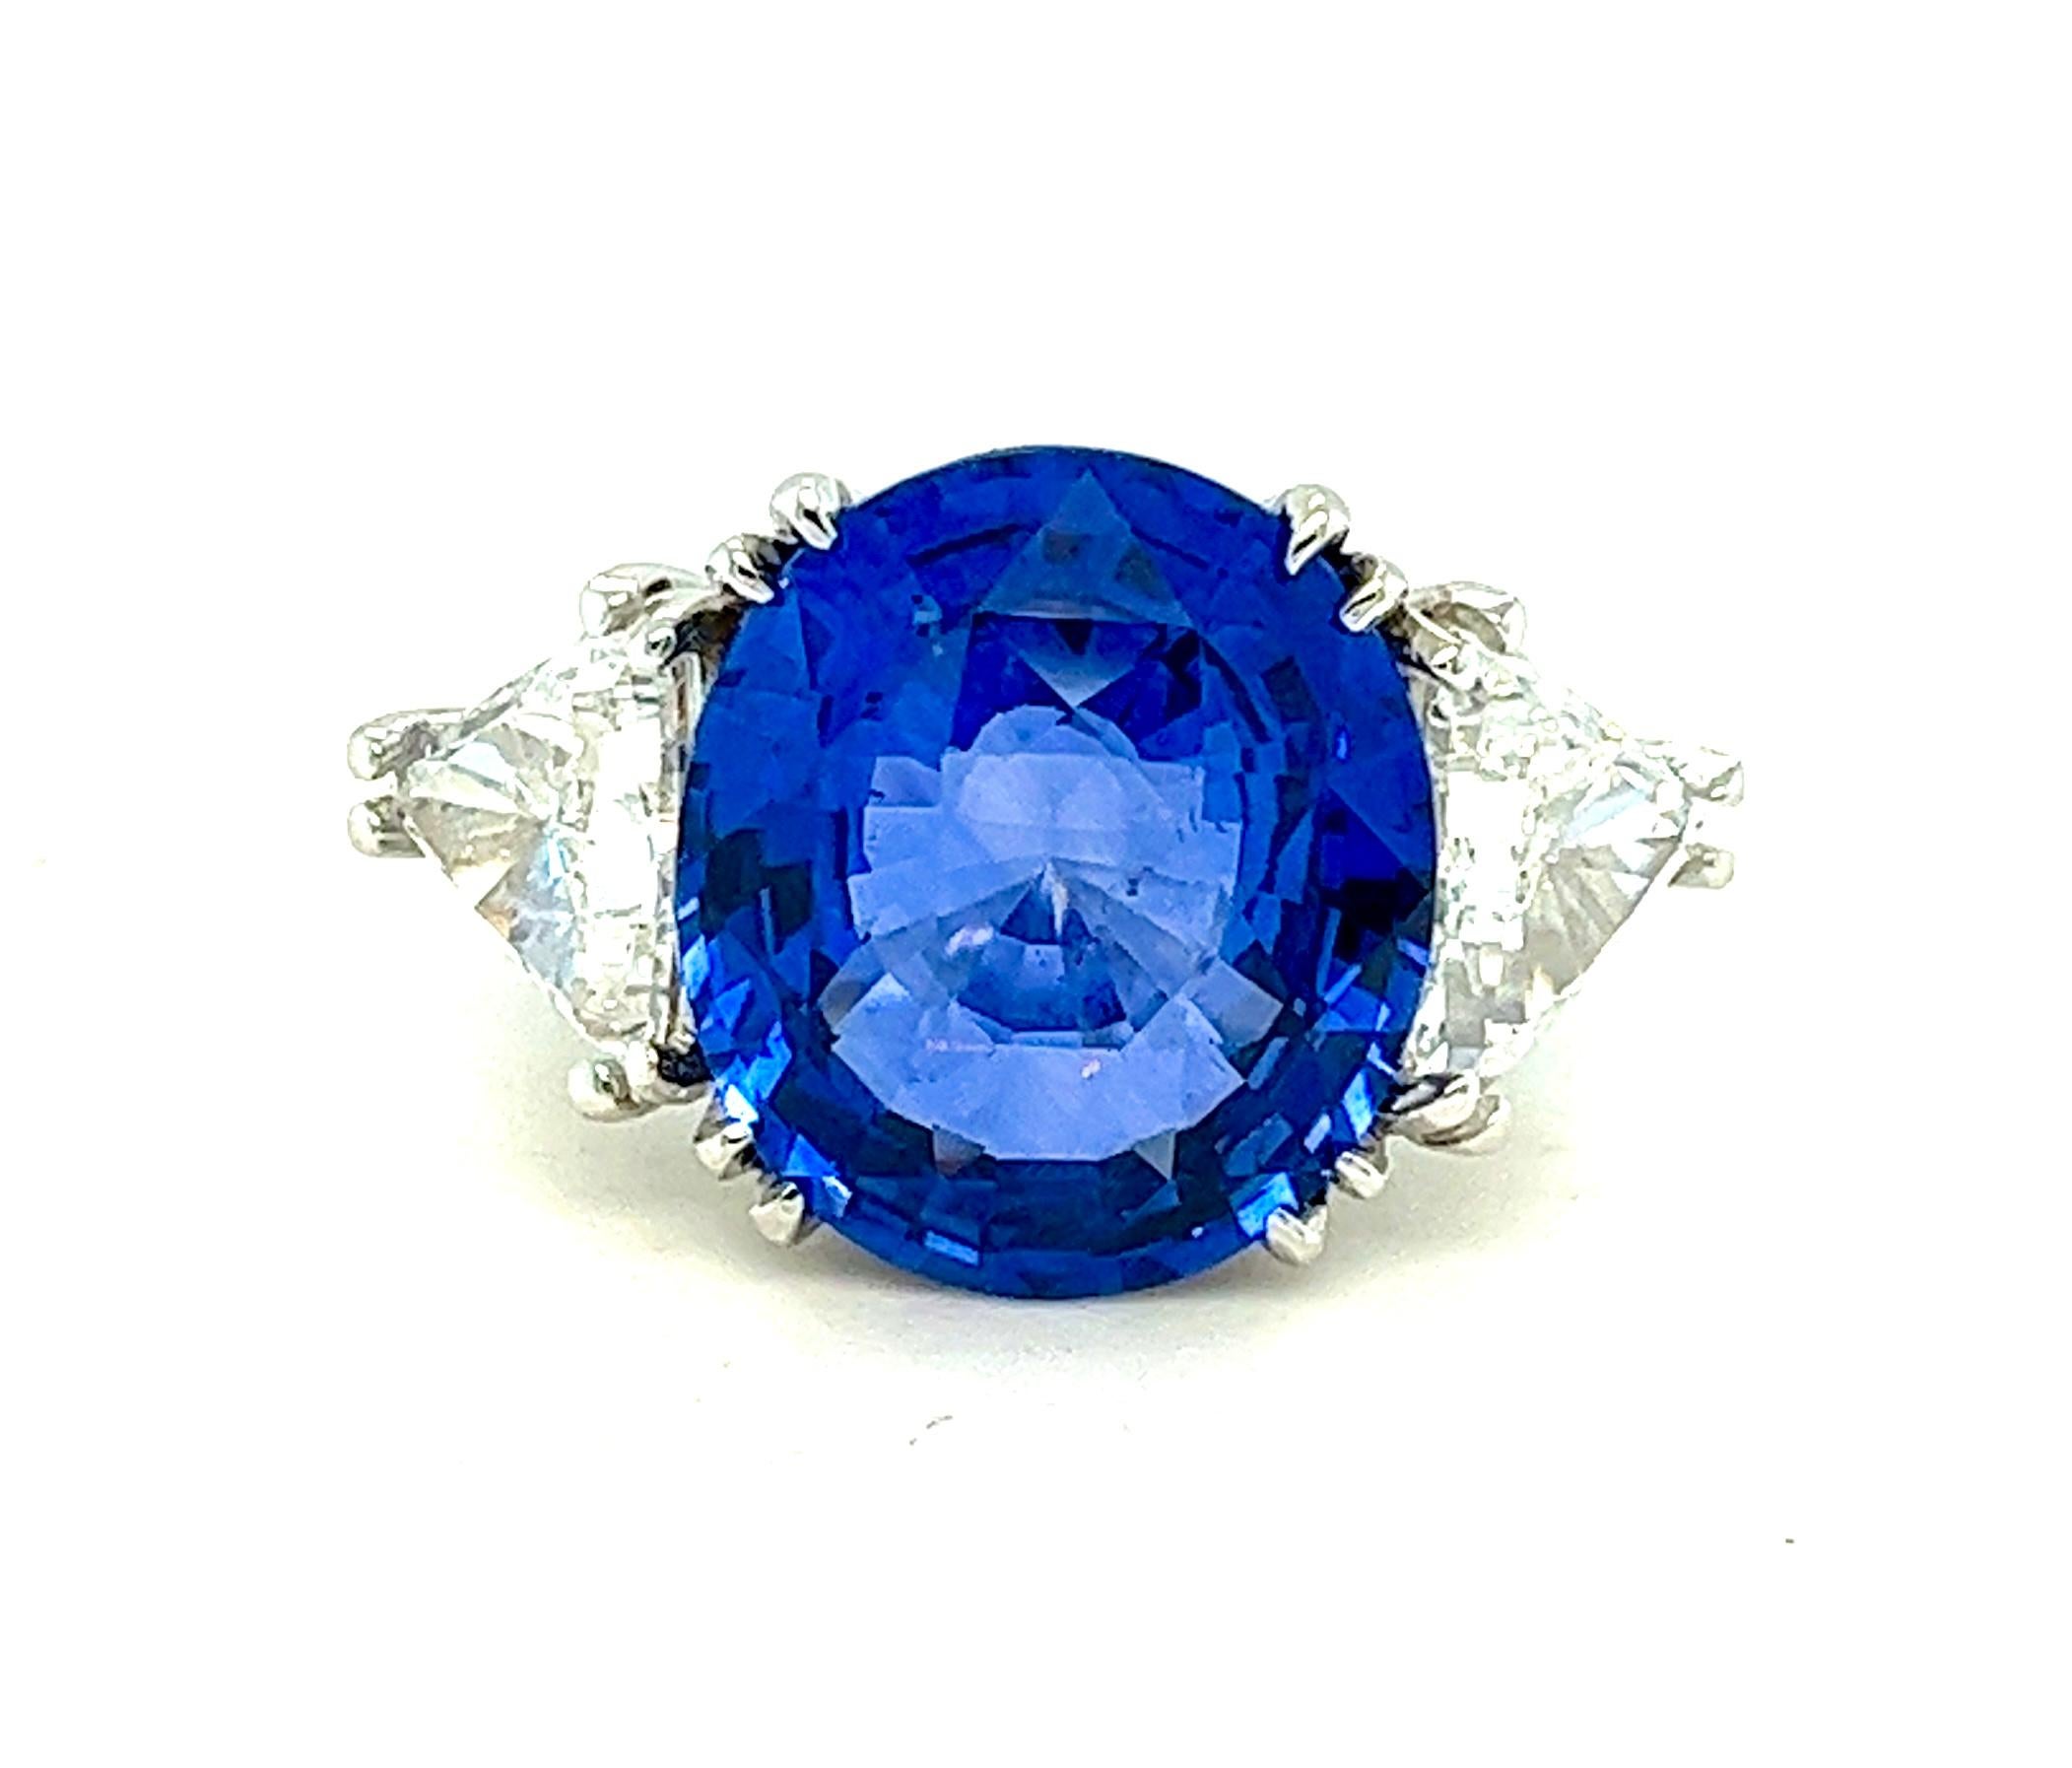 GIA Certified 14.64 Carat Blue Sapphire Diamond Ring In New Condition For Sale In Miami, FL